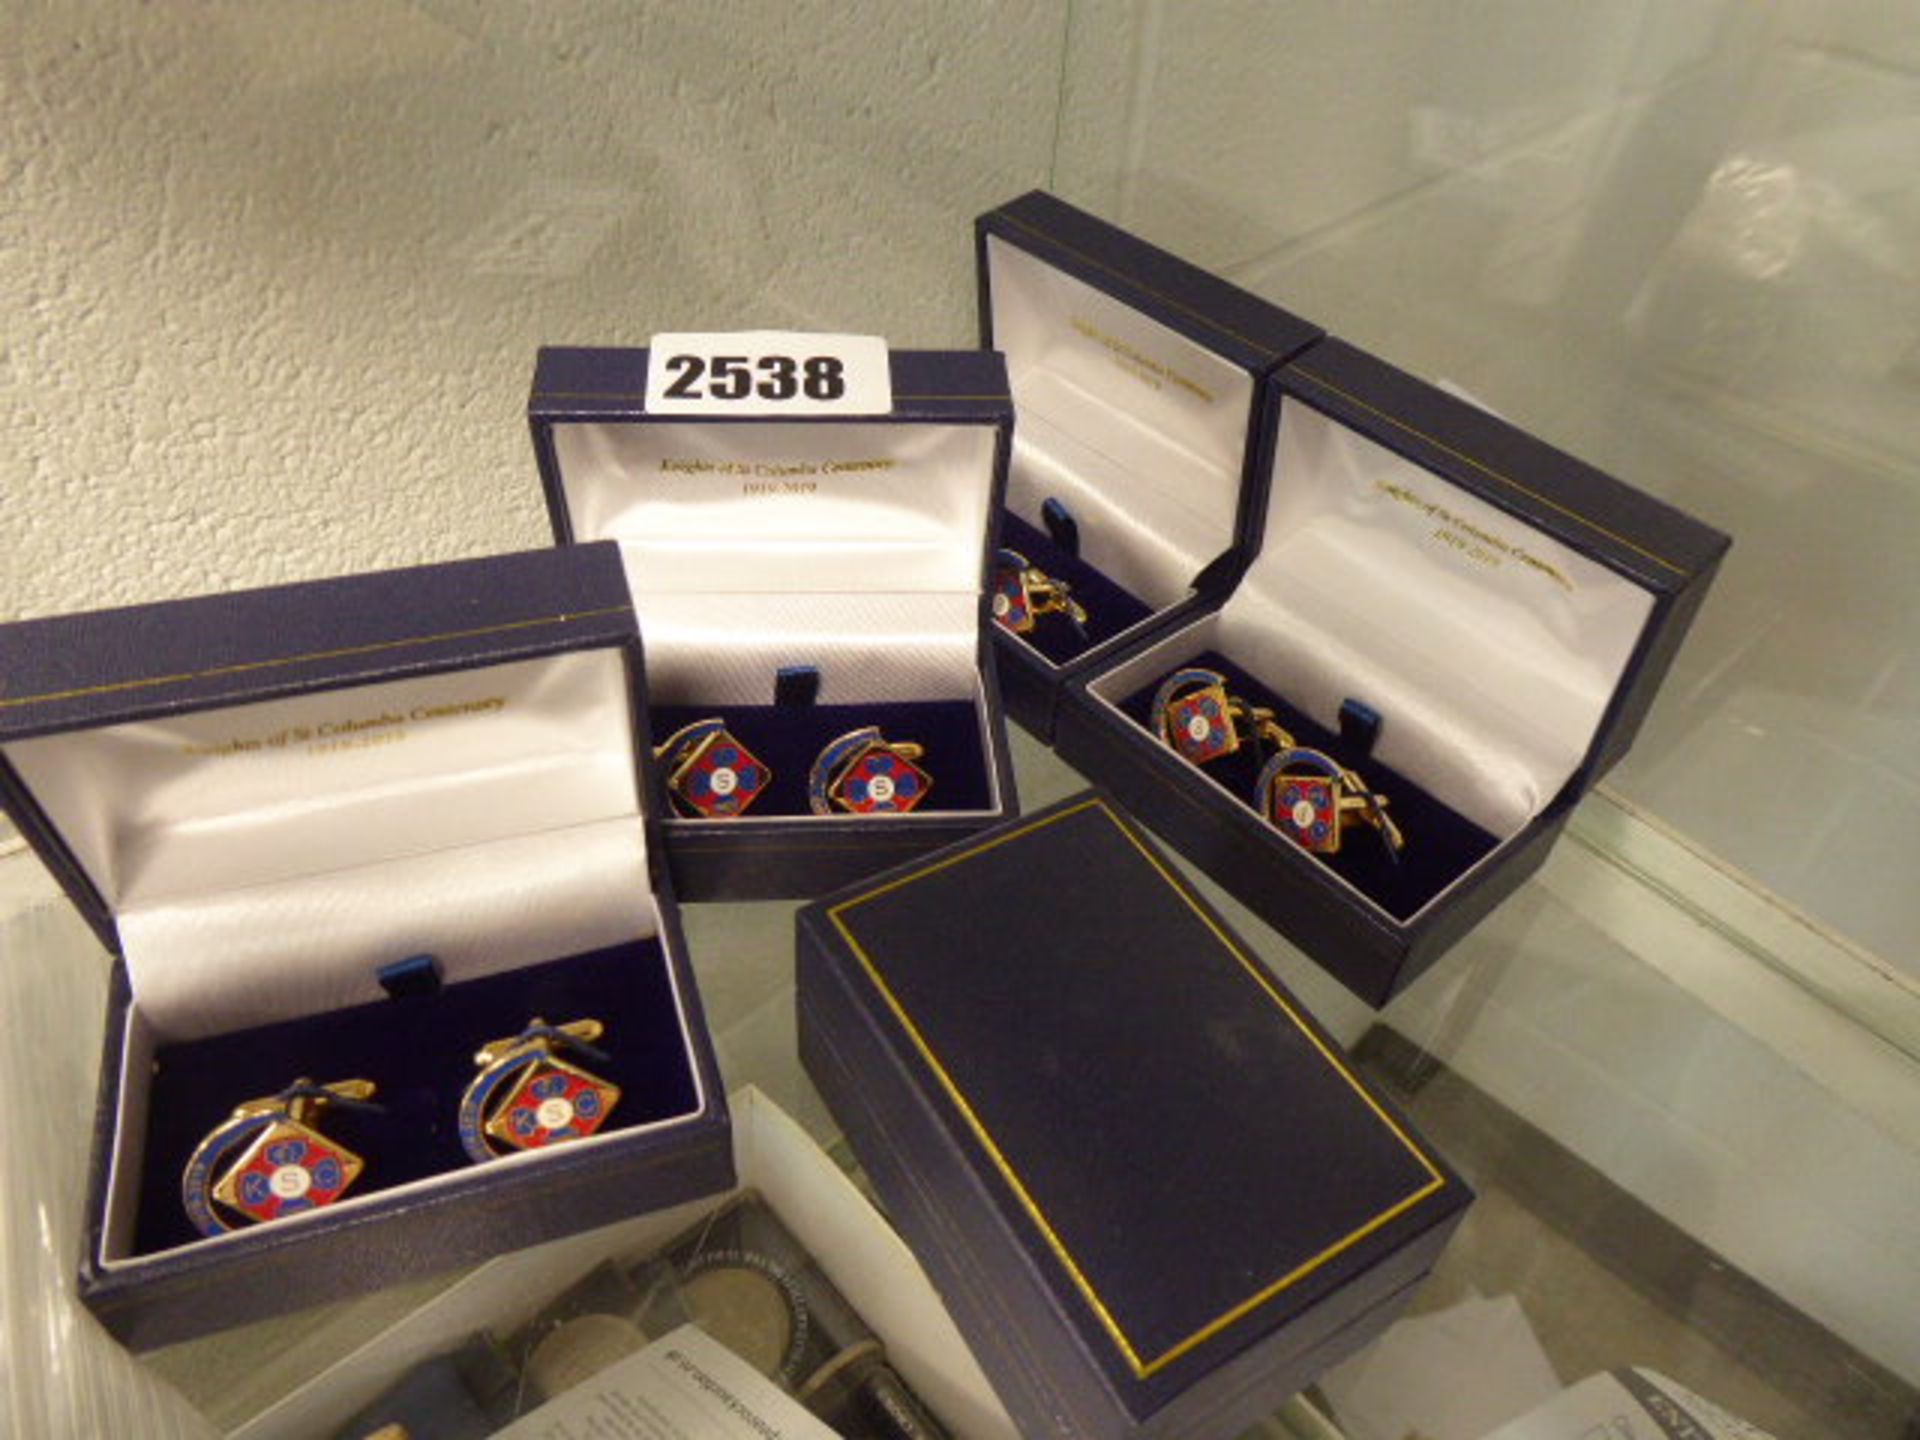 5 boxes of various cufflinks